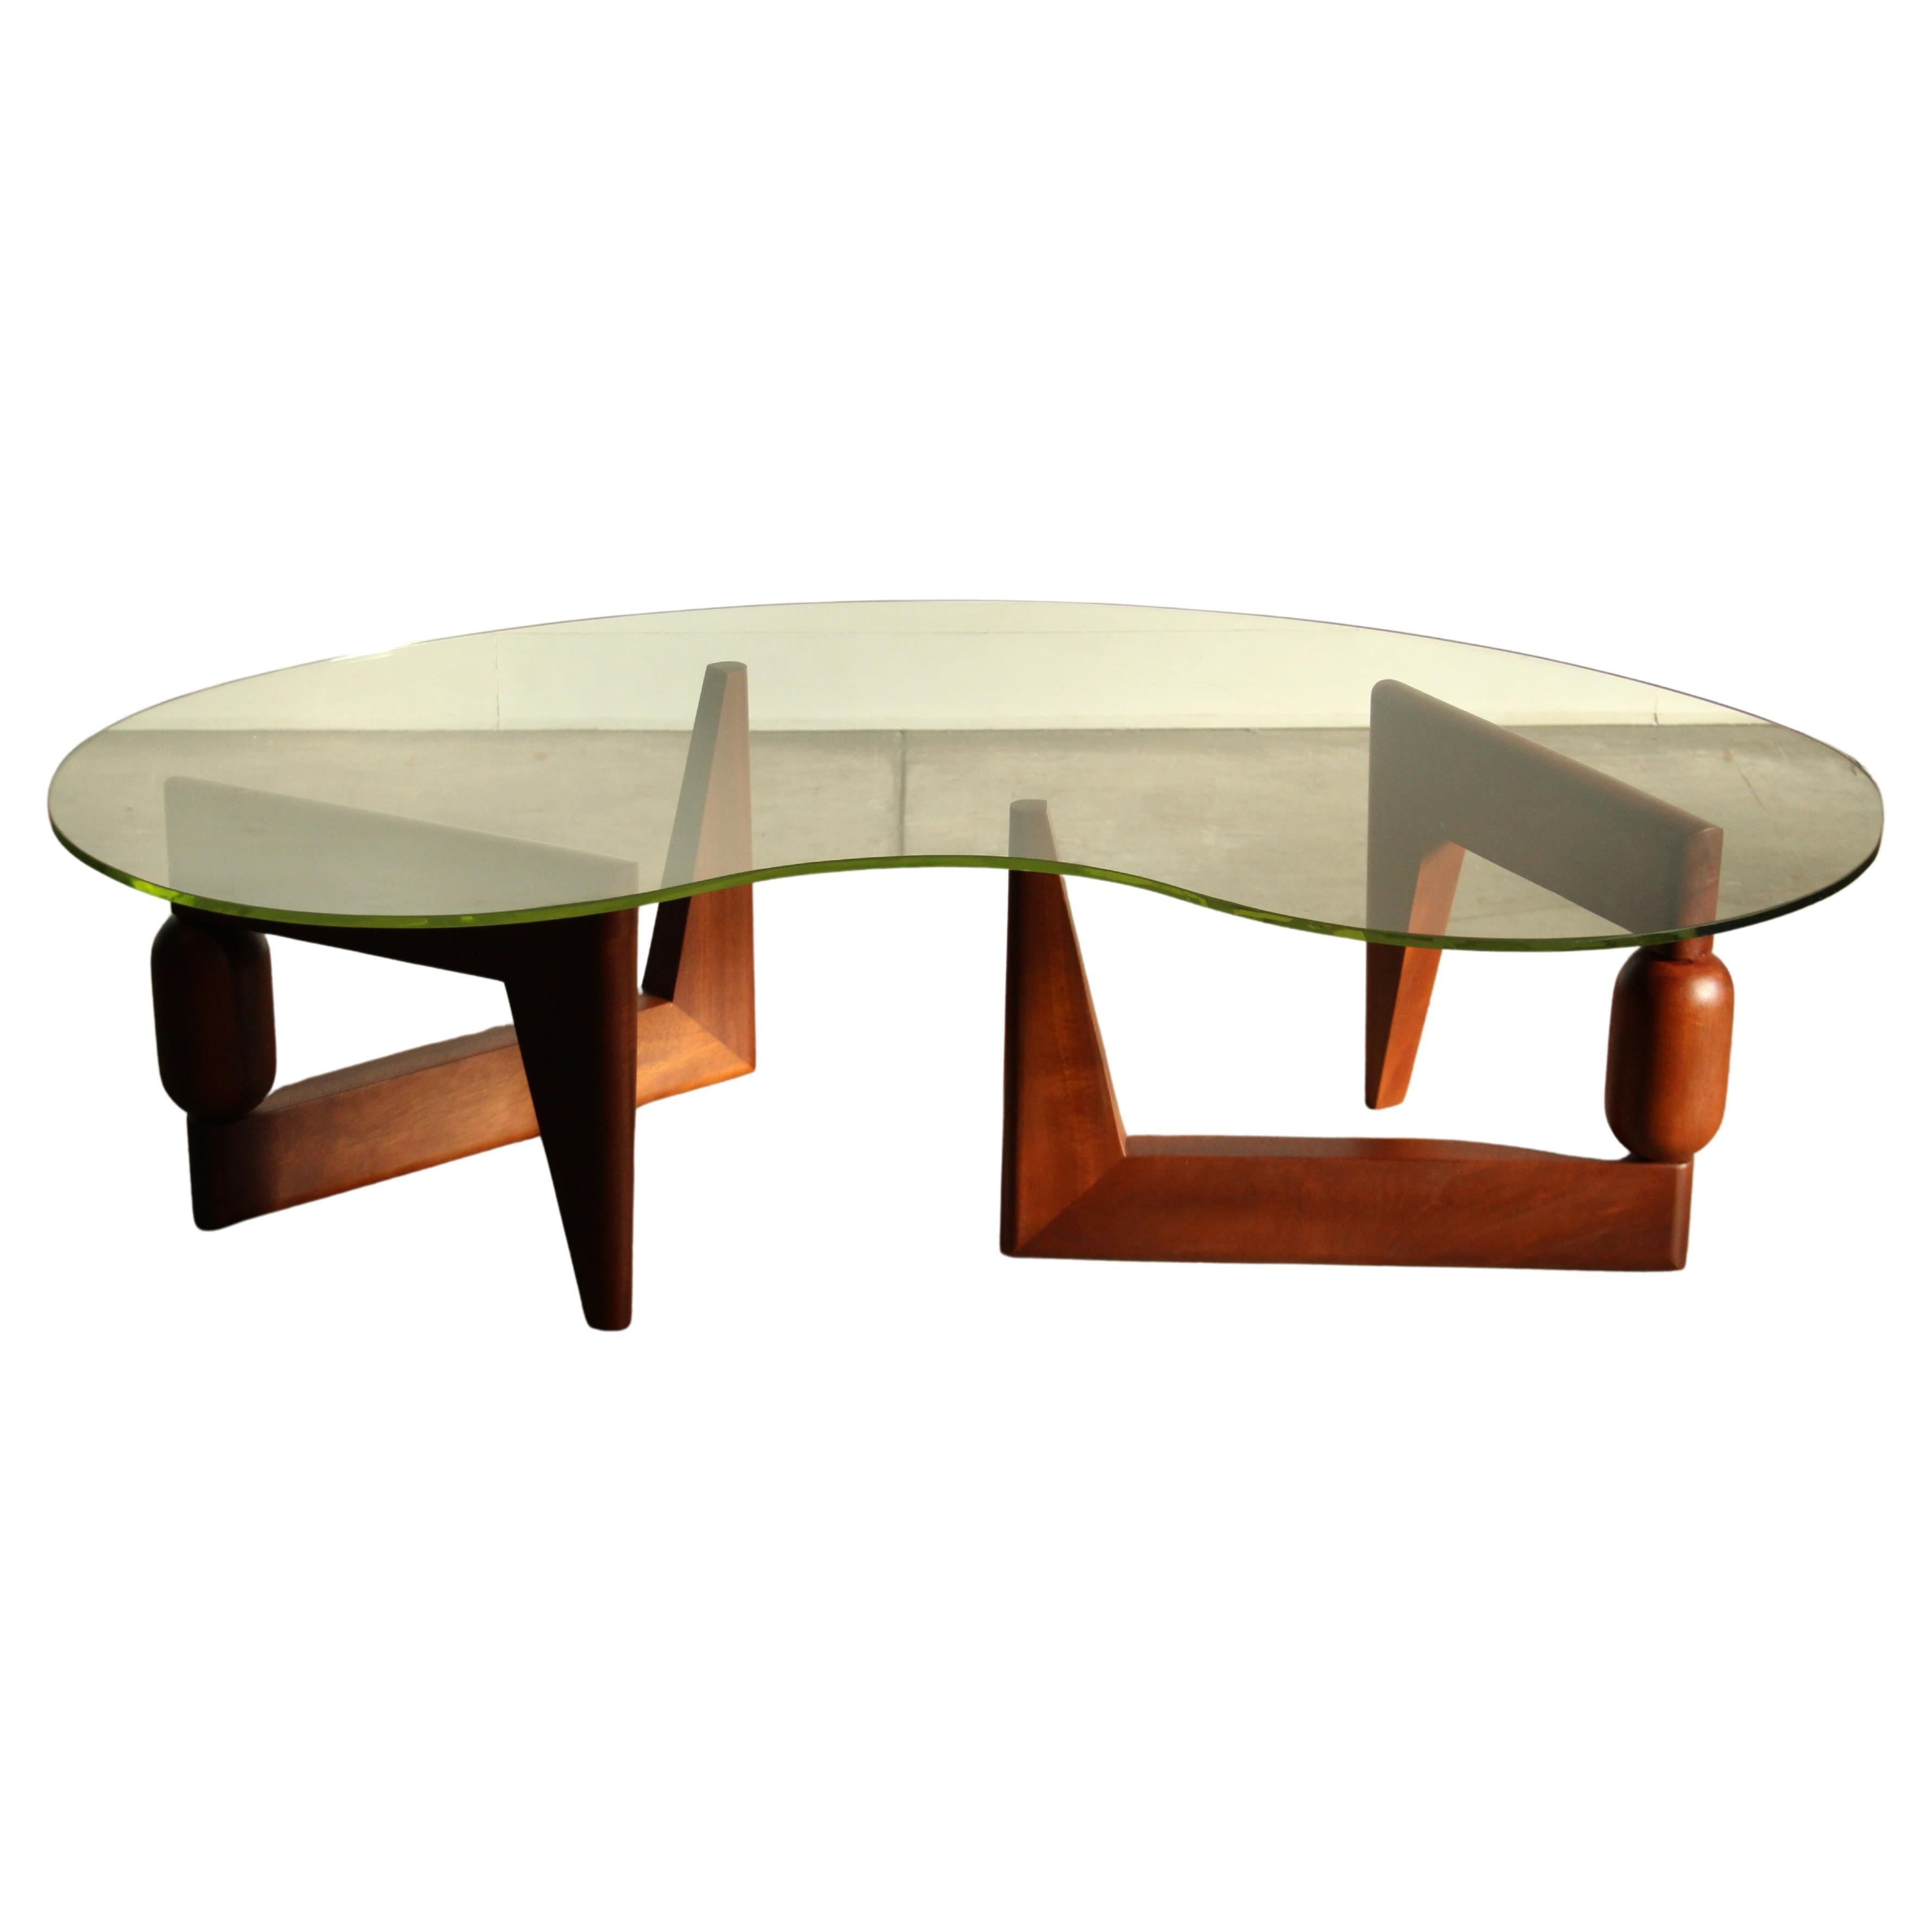 Sculptural Freeform Coffee Table in the Manner of Isamu Noguchi, 1970s For Sale